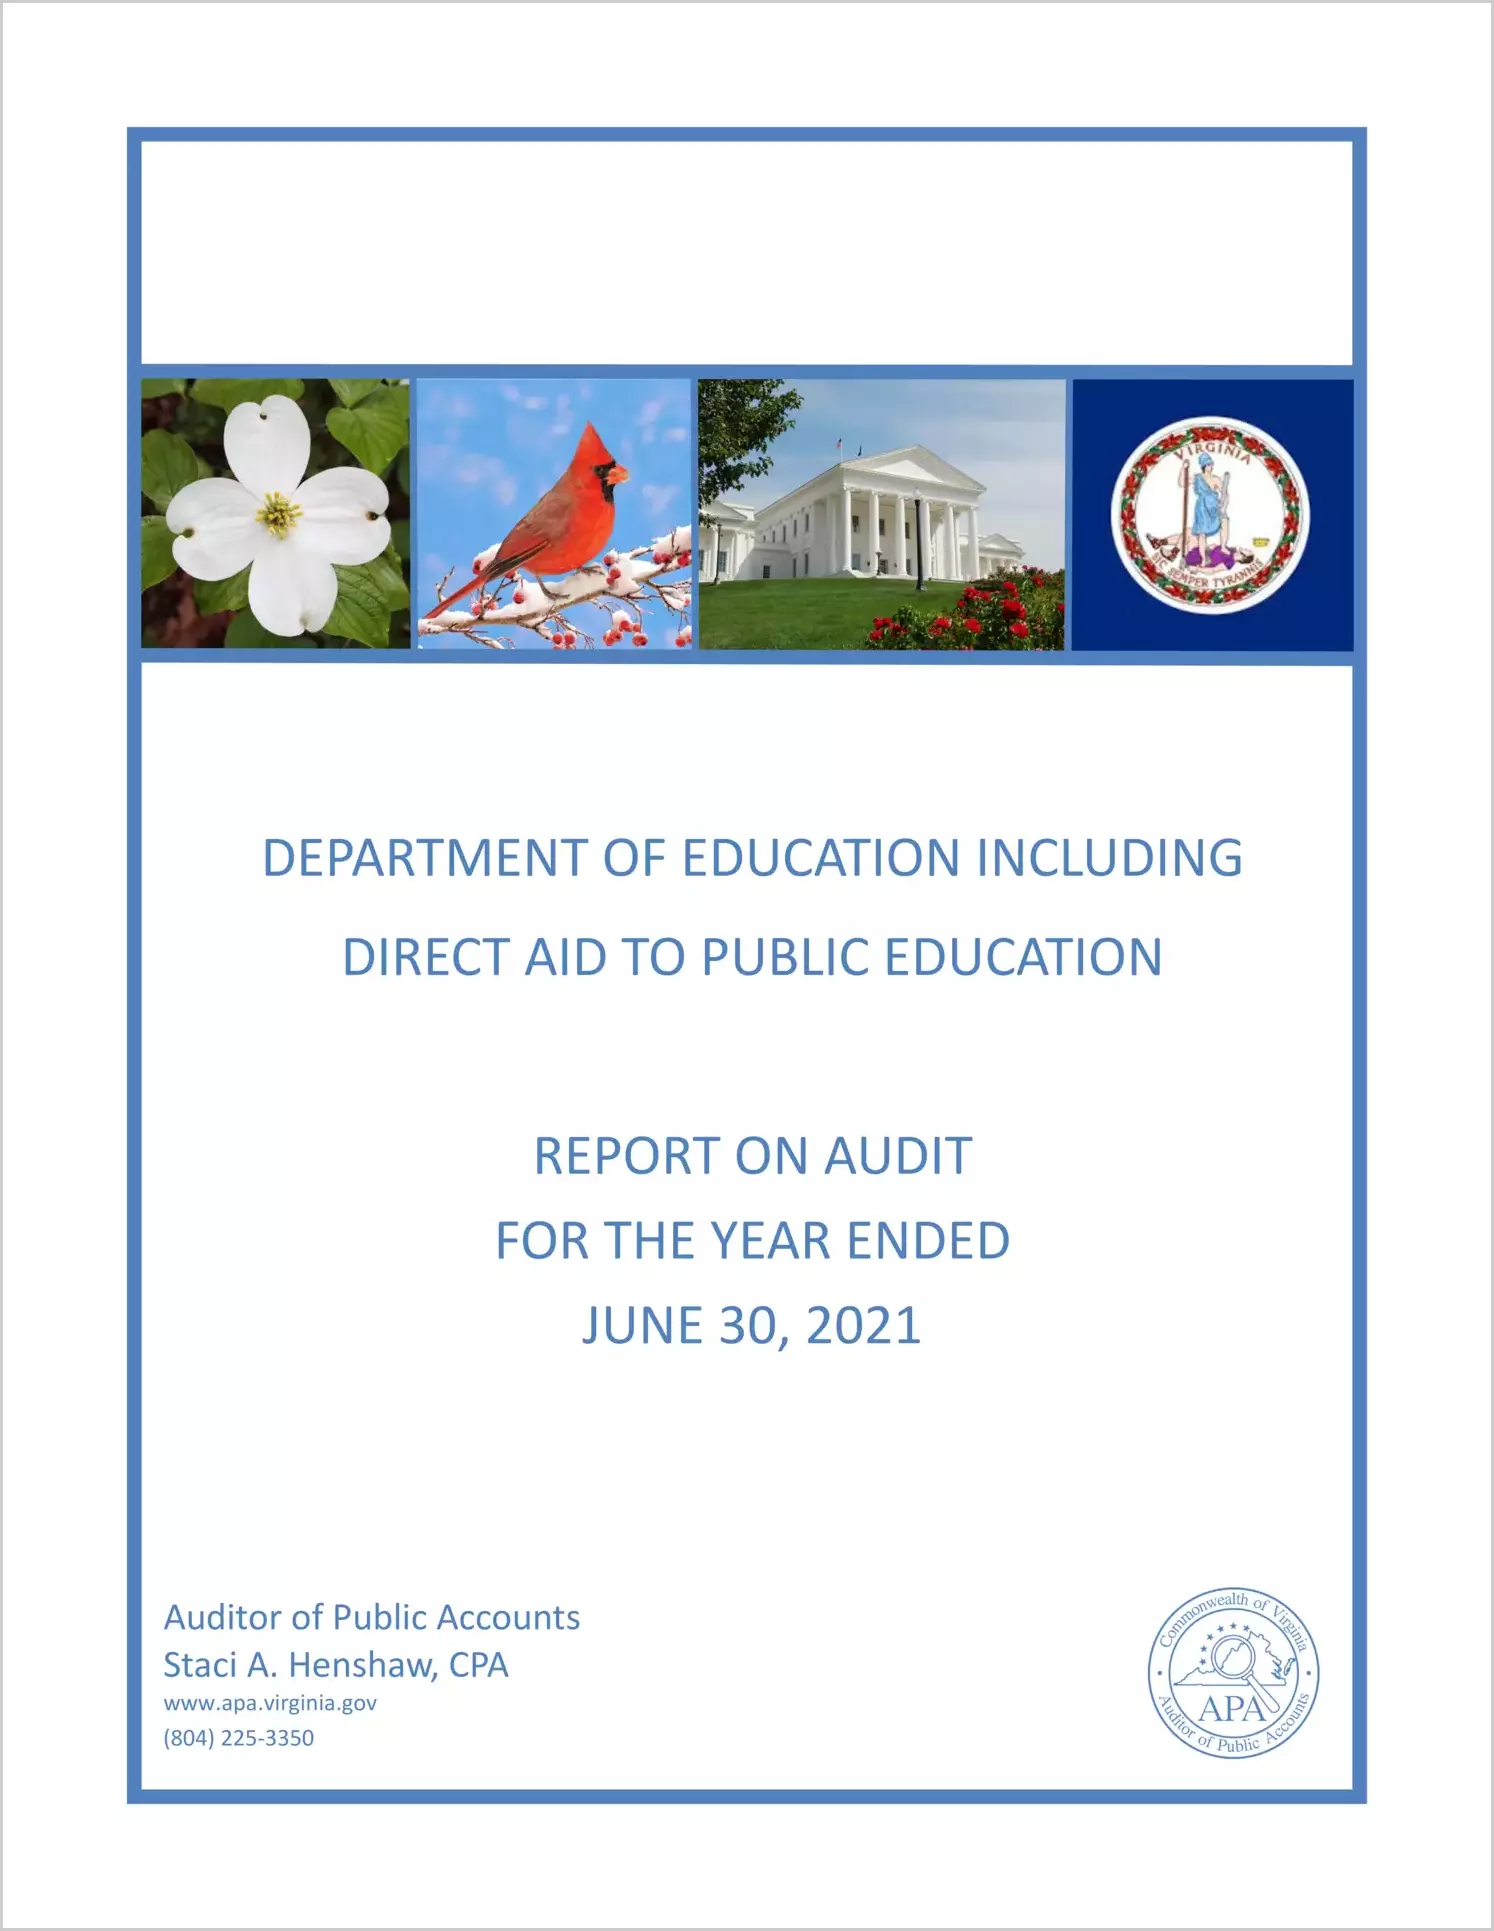 Department of Education including Direct Aid to Public Education for the year ended June 30, 2021